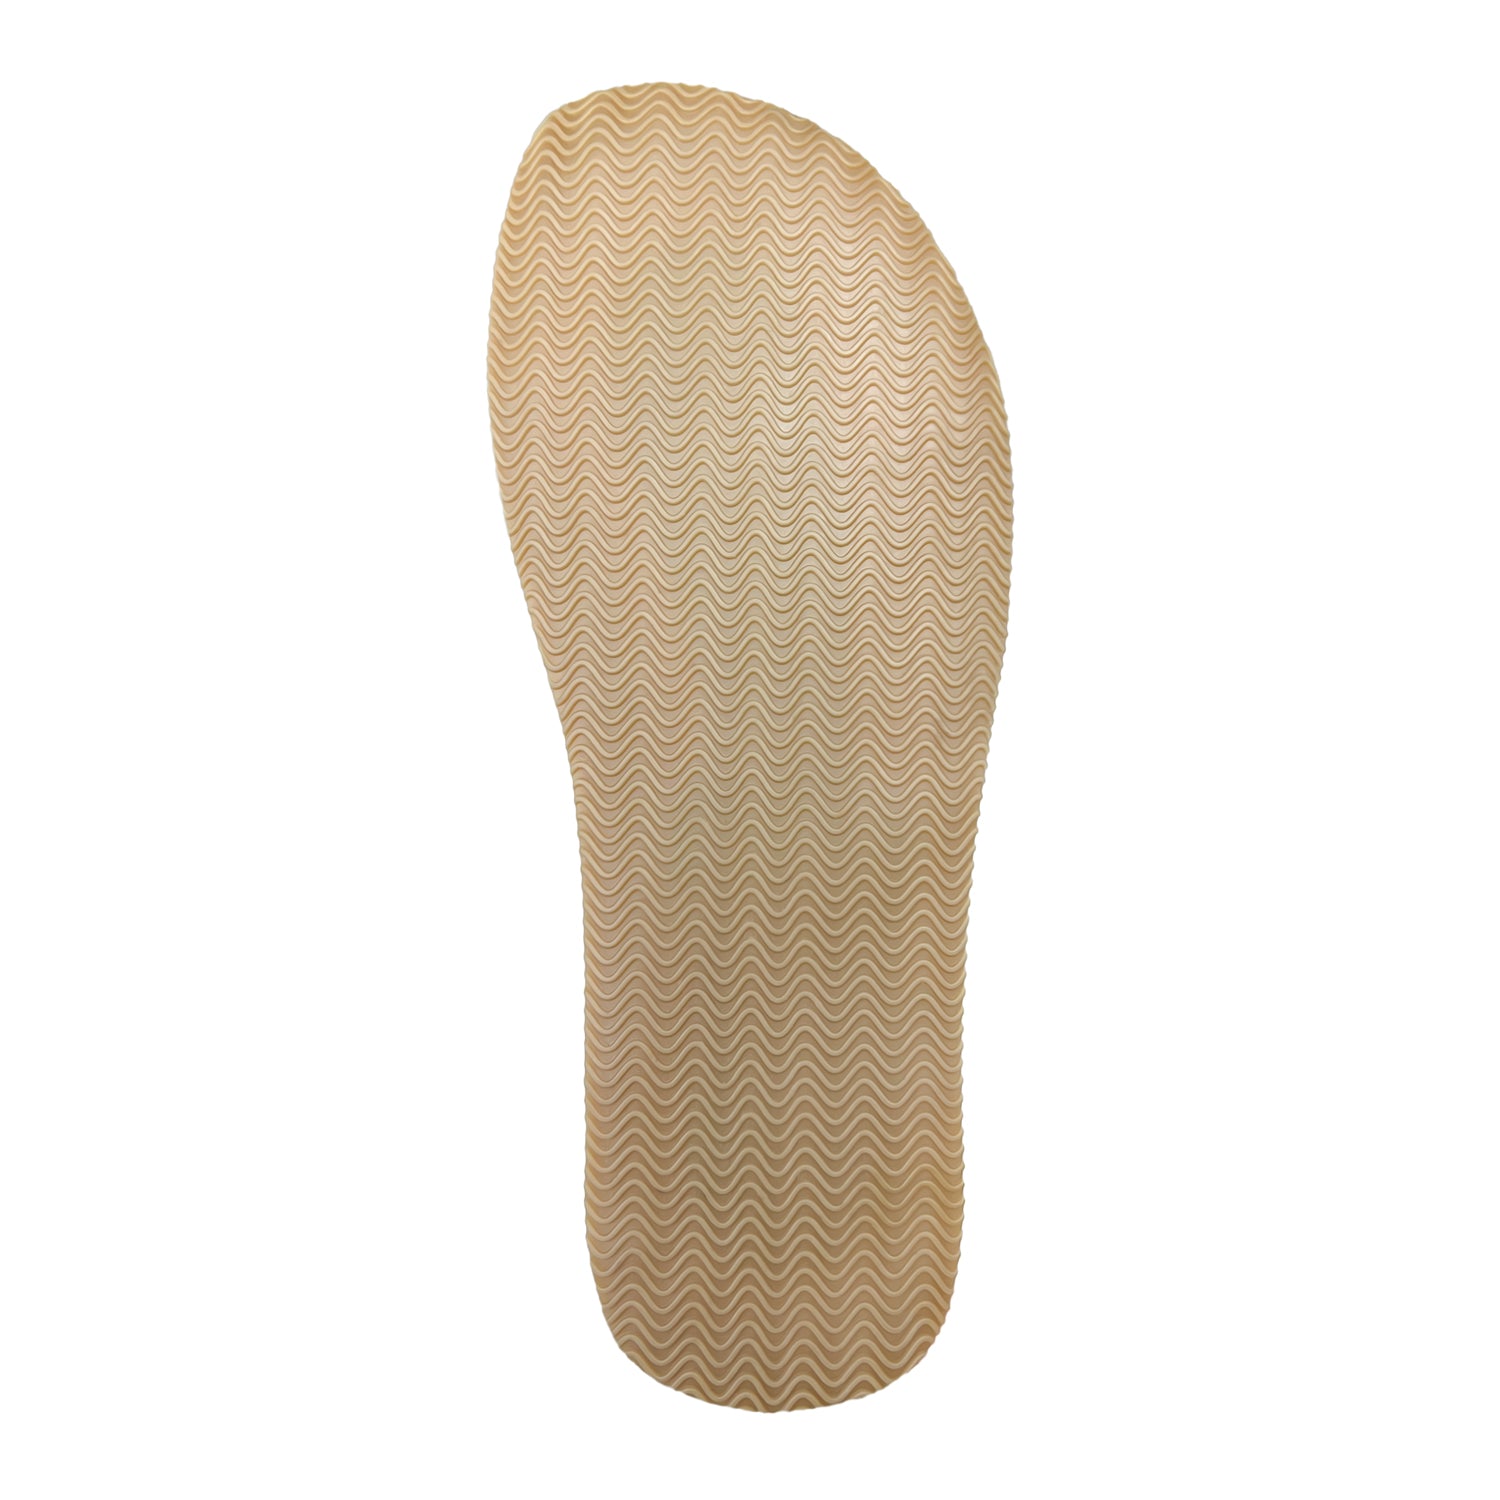 A textured beige orthopedic shoe insole featuring a wavy pattern and a slip-on design, the Oso Canvas from Bearfoot.